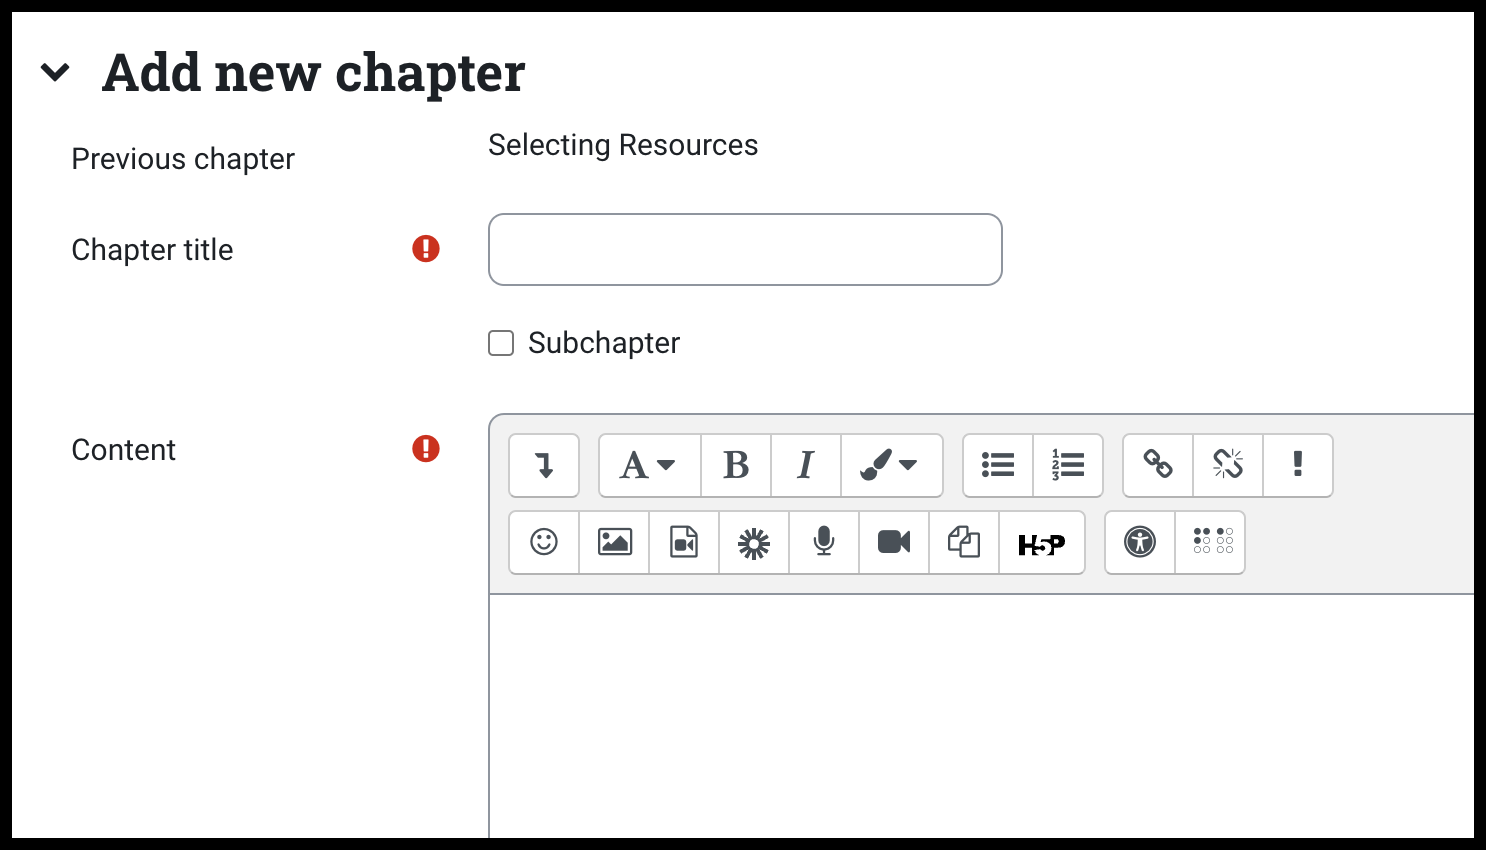 Fields to enter Chapter title and Content displayed